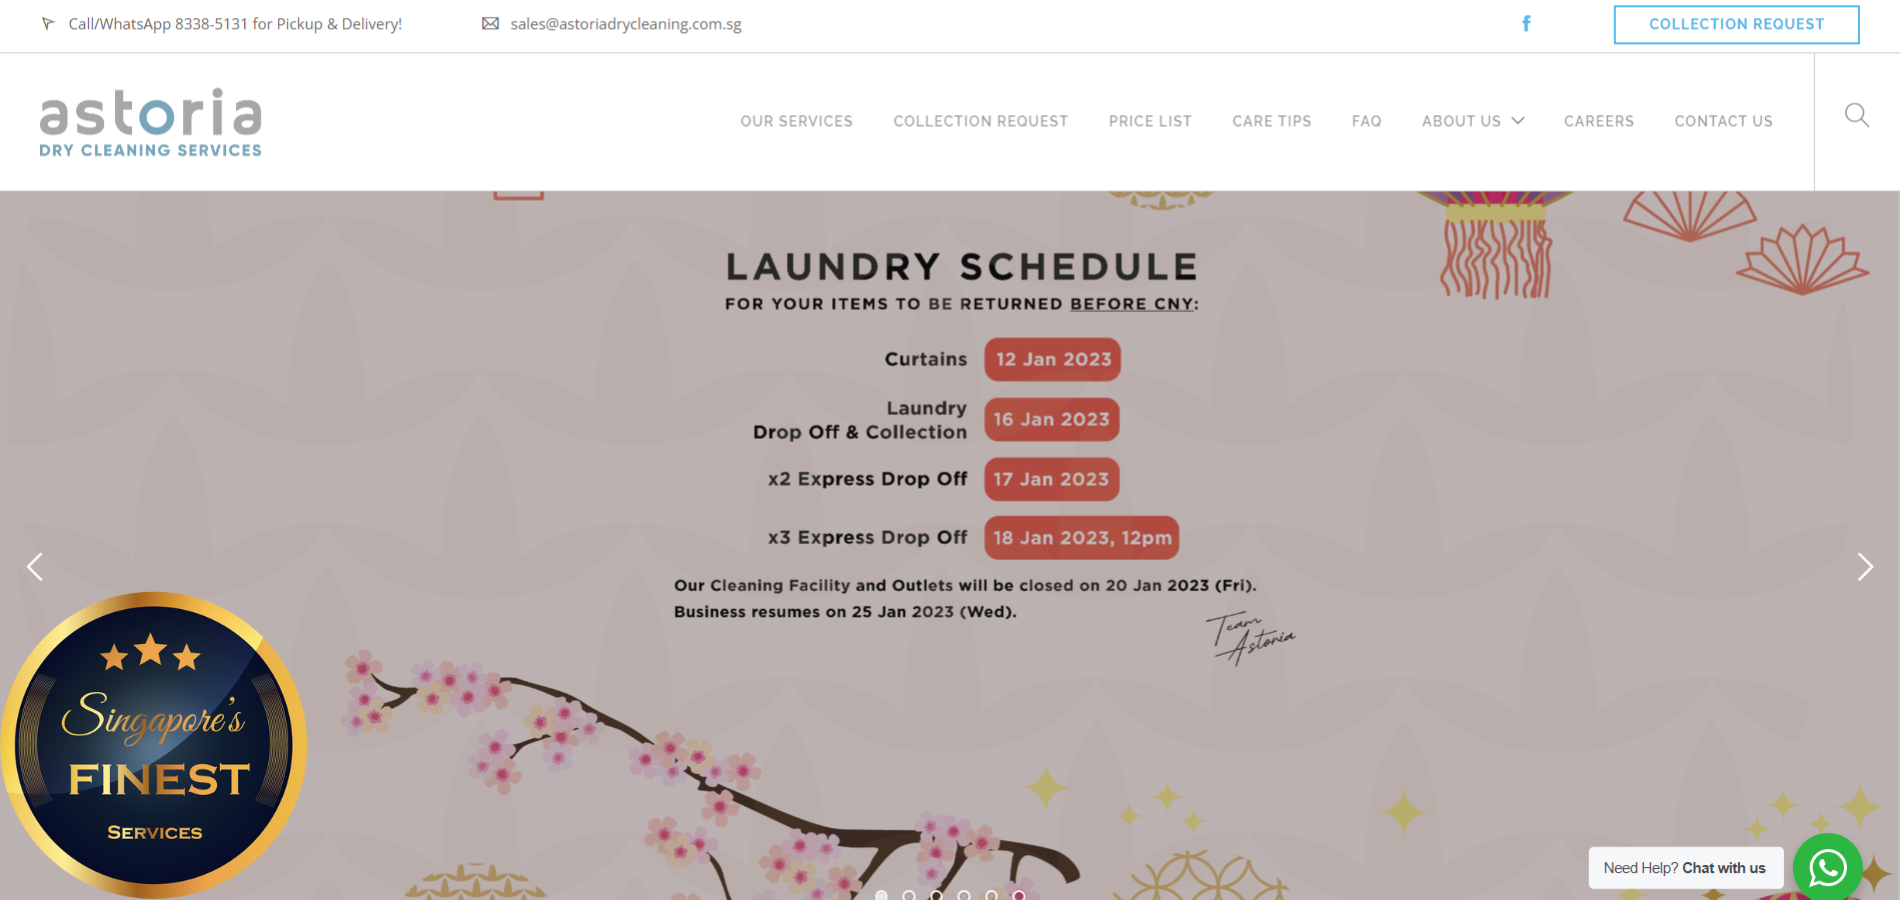 The Finest Dry Cleaning Services in Singapore